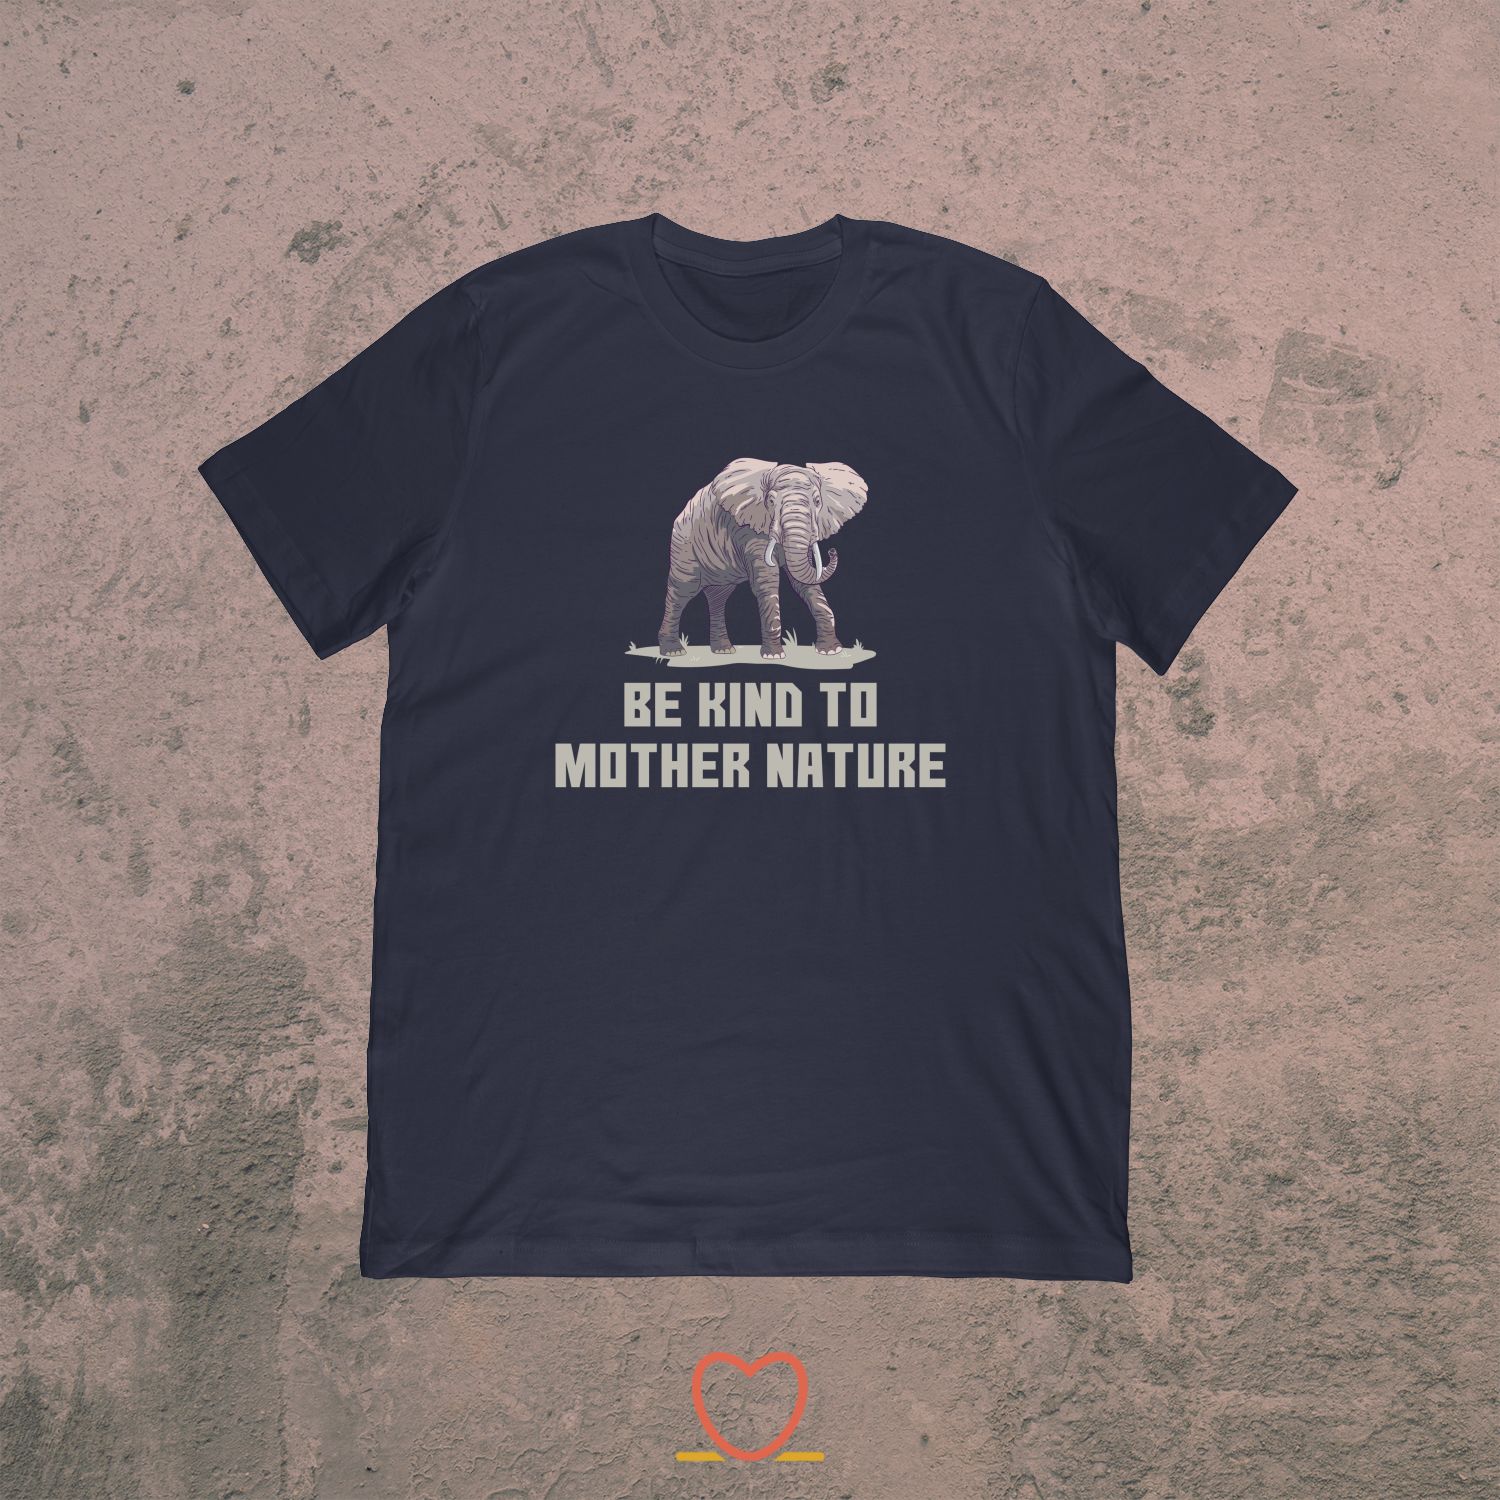 Be Kind To Mother Nature – Animal Rescue Tee